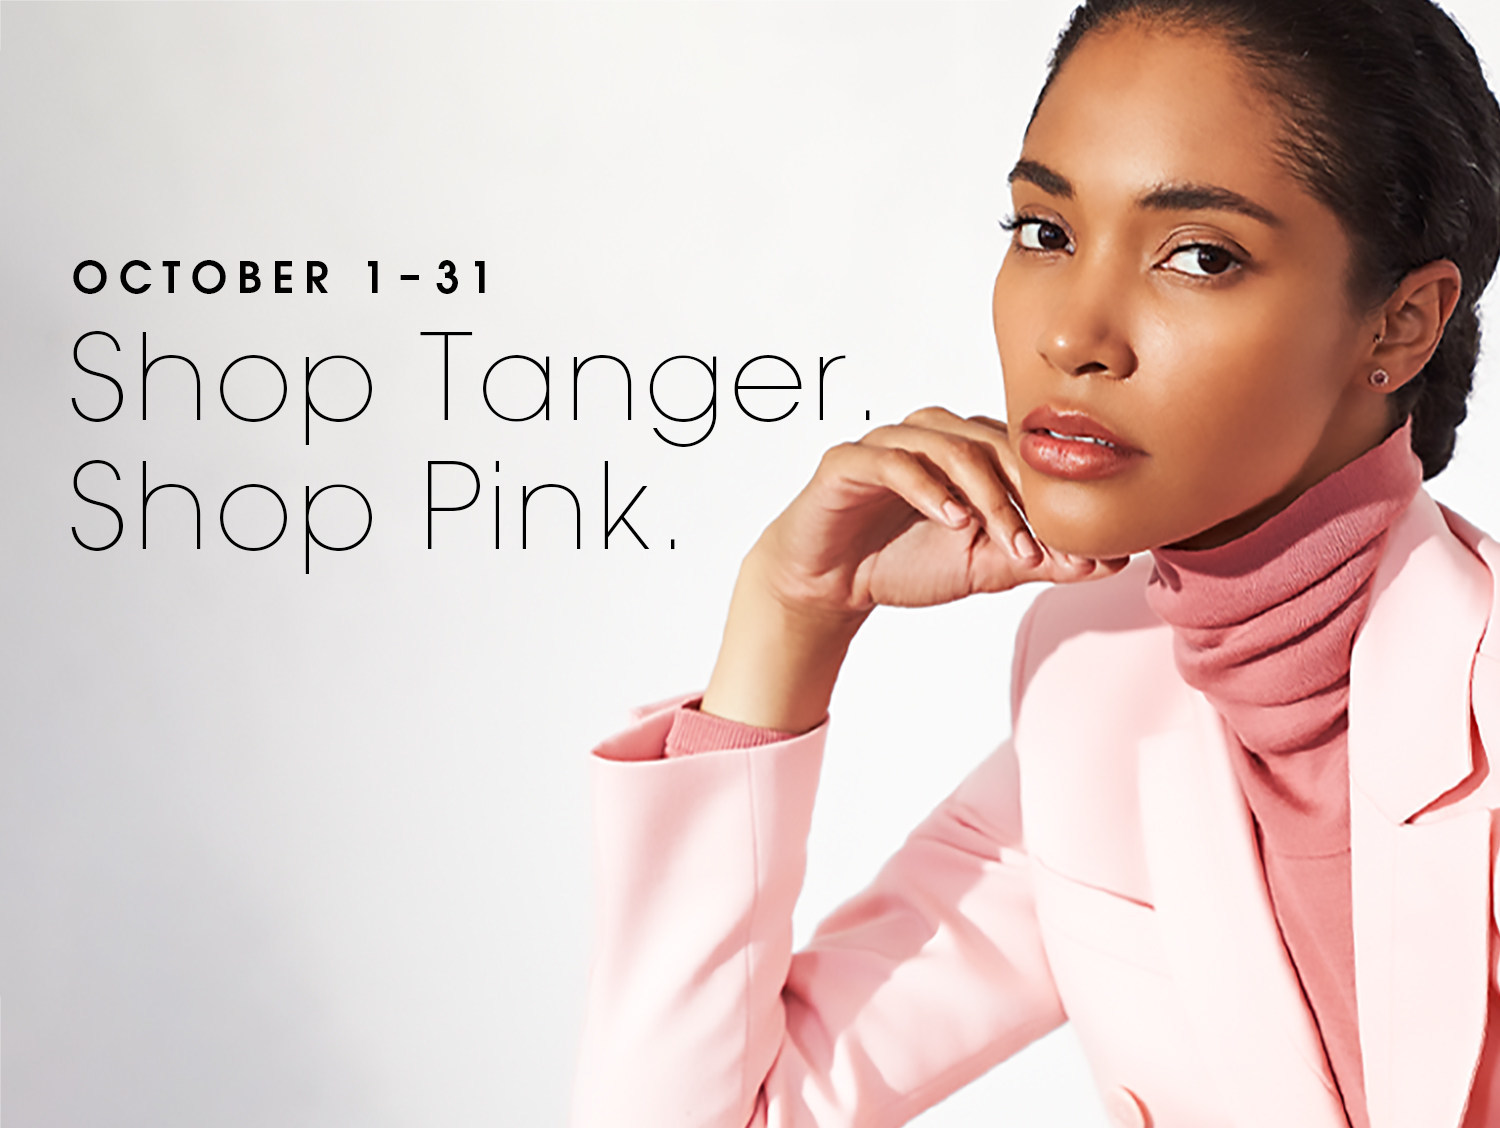 tanger outlets, breast cancer month